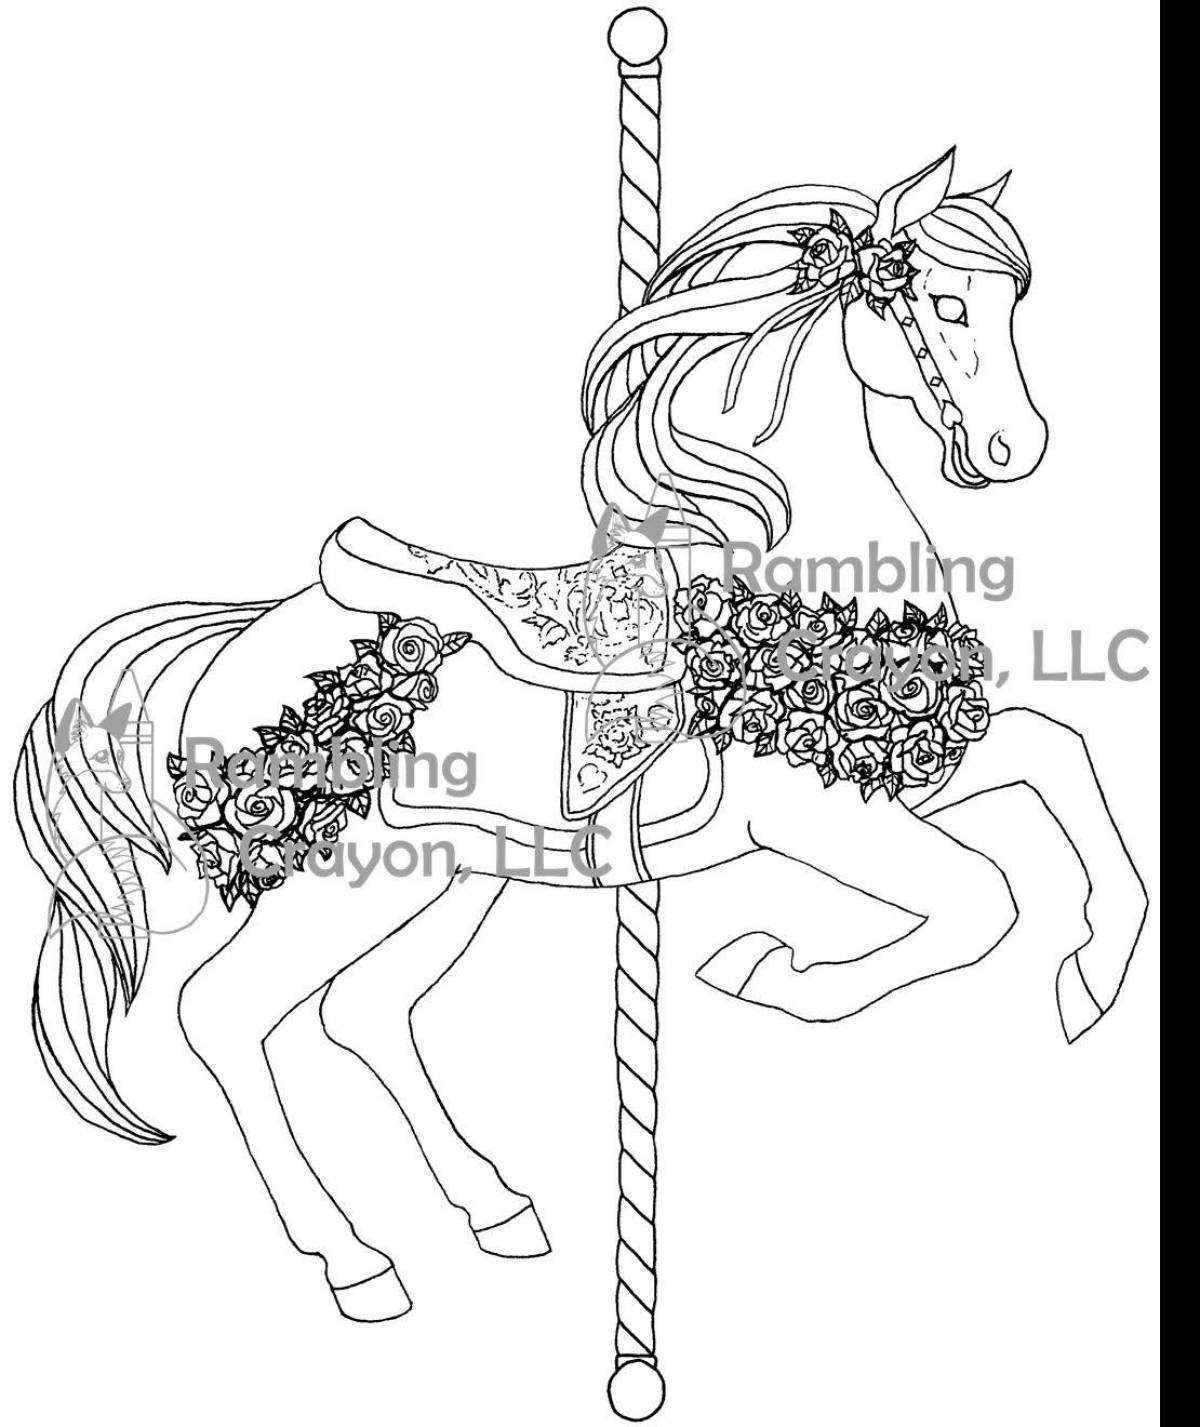 Coloring book magnanimous horse Gorodets painting